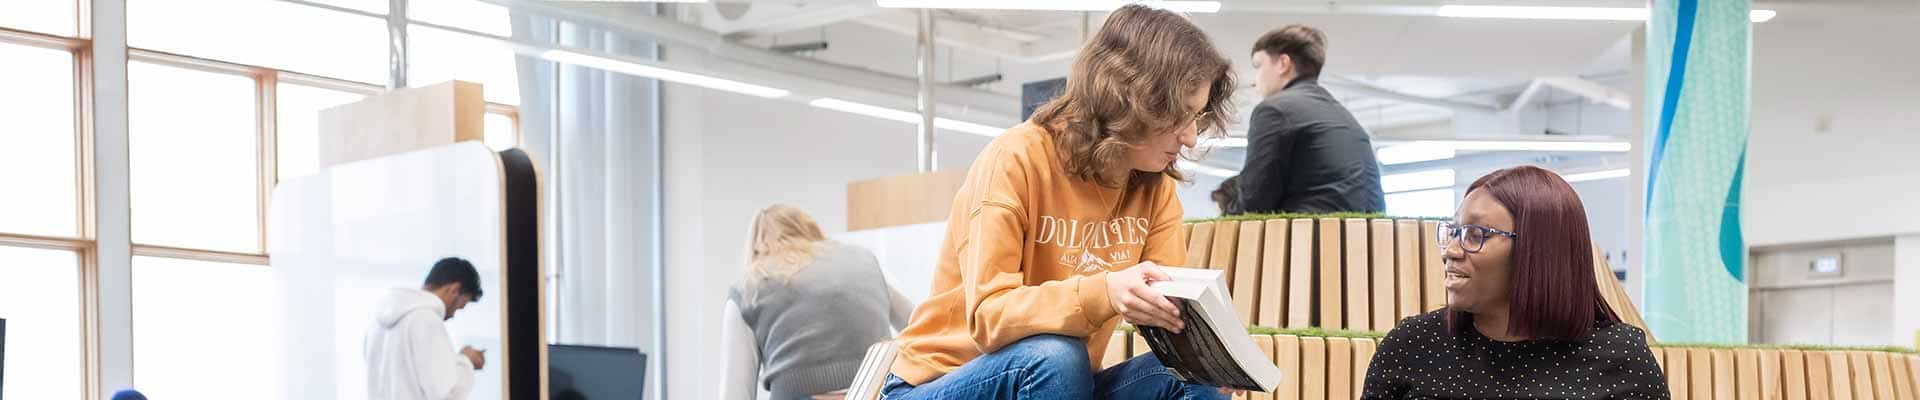 2 female students sitting in Student hub looking at books